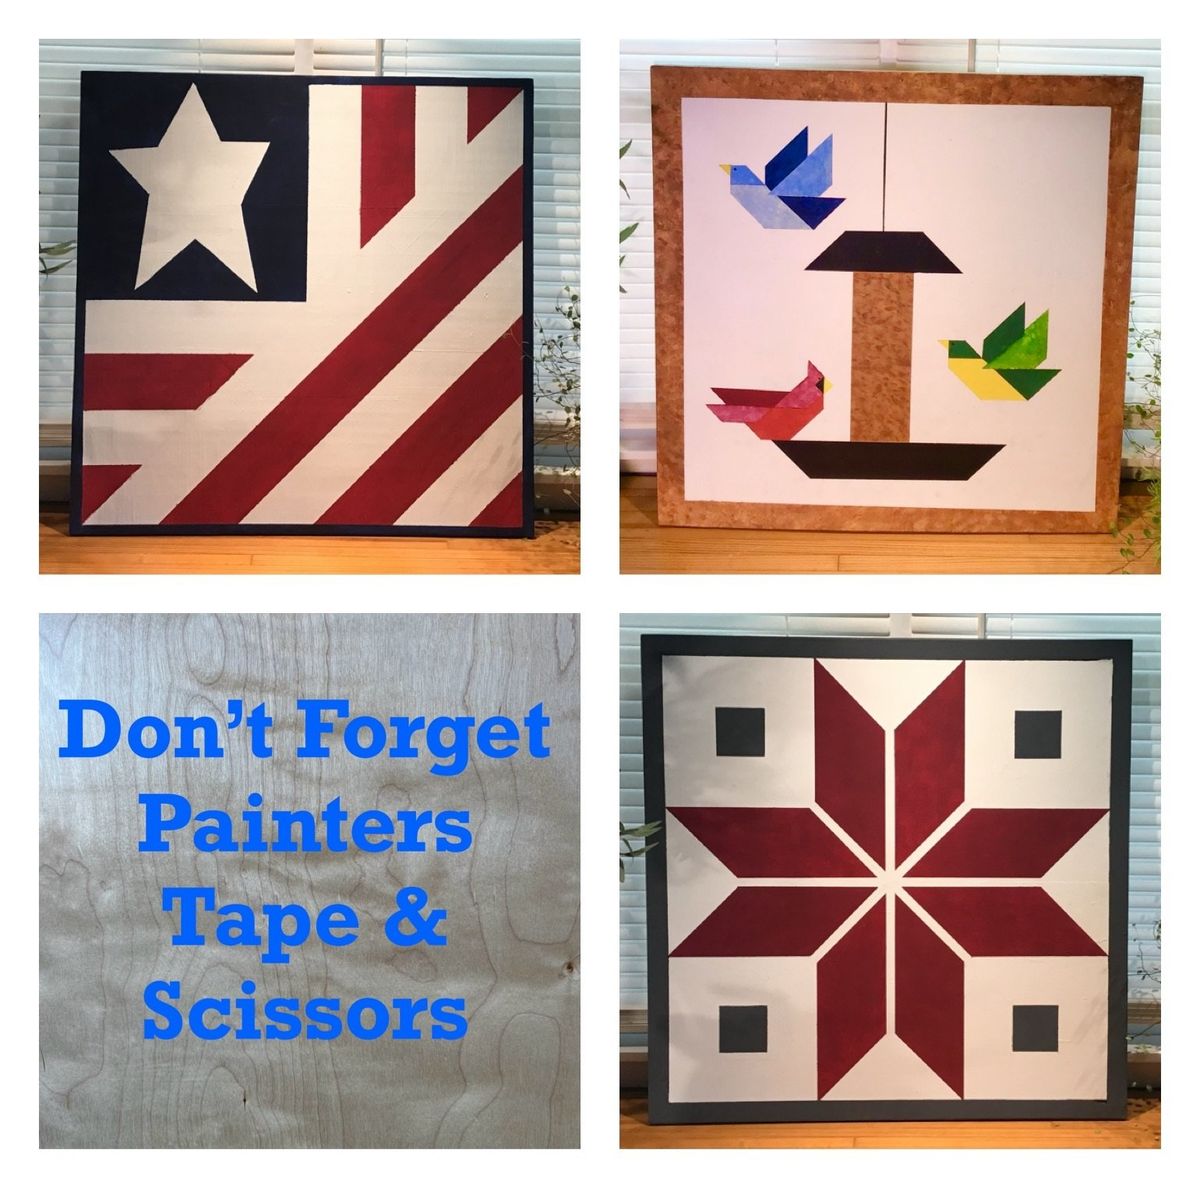 Linda's Wooden Barn Quilt Painting